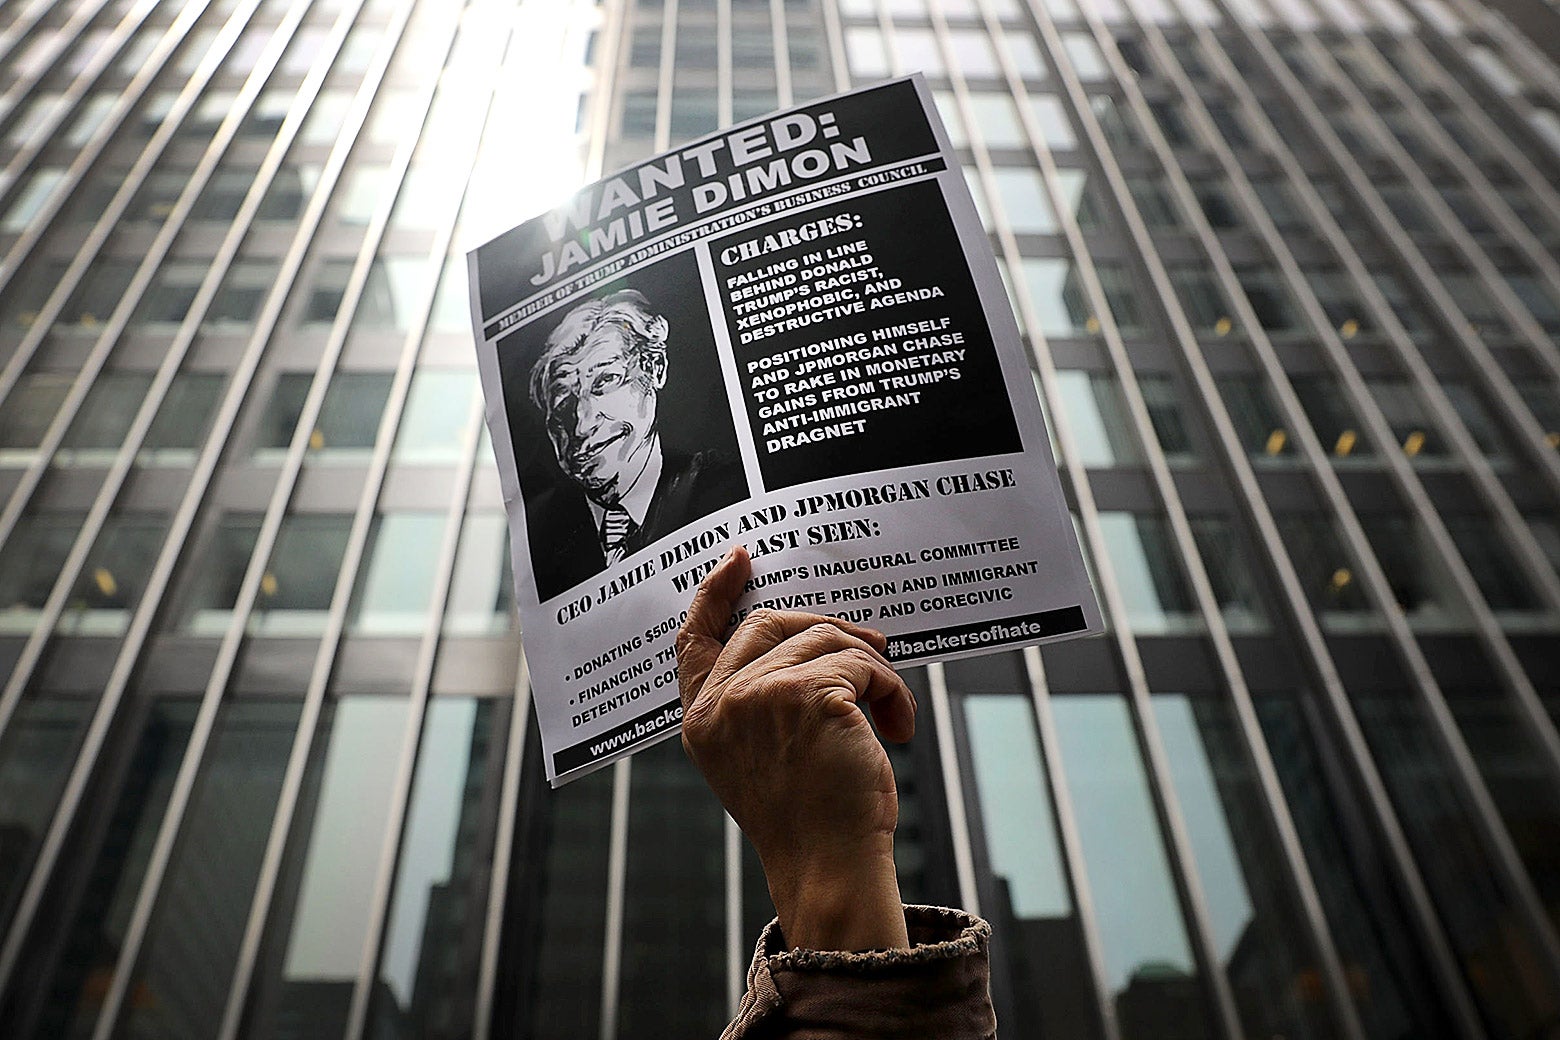 A mockup of a wanted poster for JPMorgan CEO Jamie Dimon is held outside his apartment in New York City.